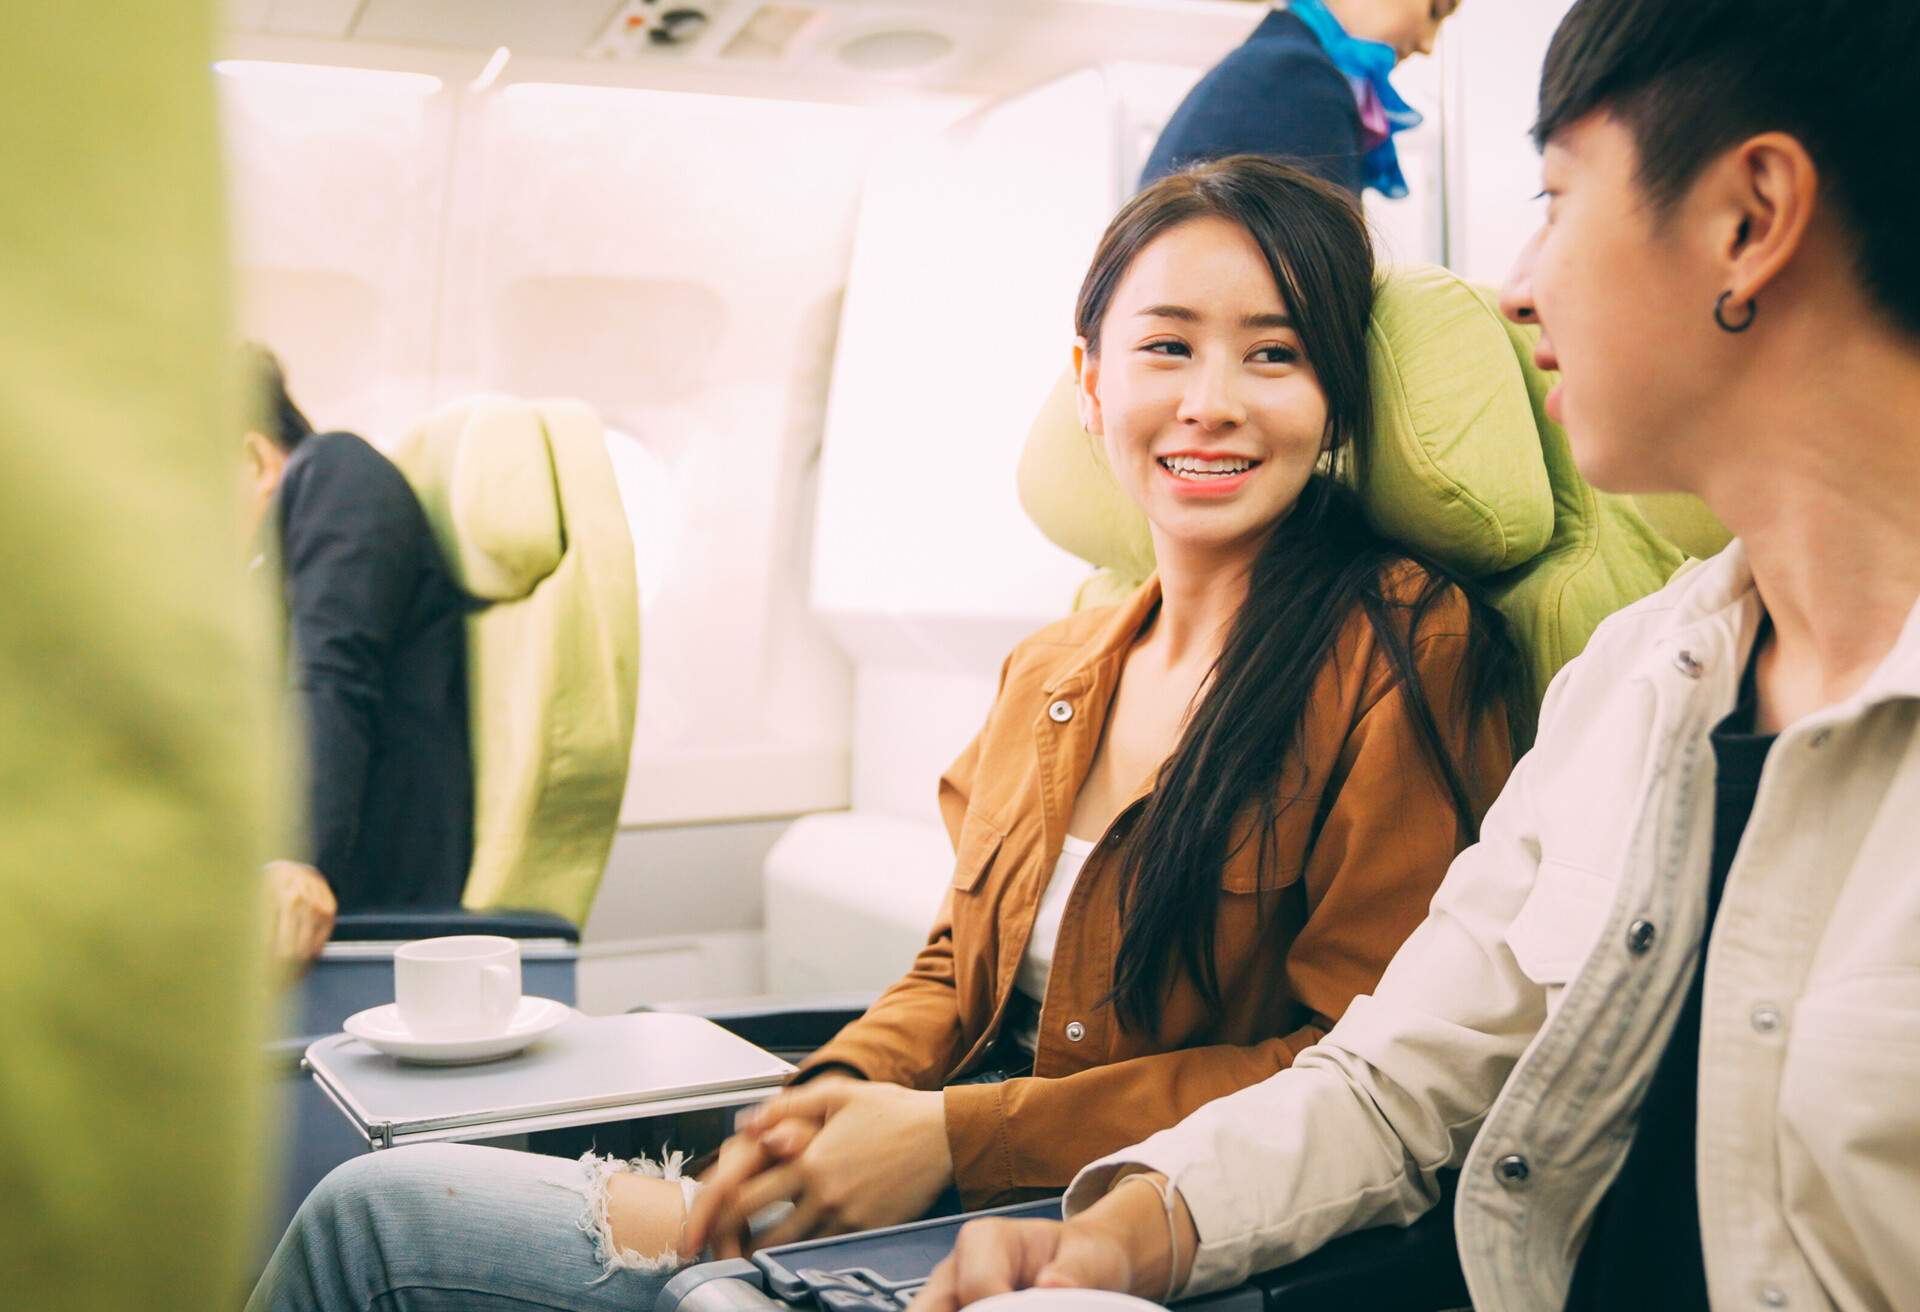 A young Asian couple engaged in a lively conversation on an airplane, their faces radiating happiness.